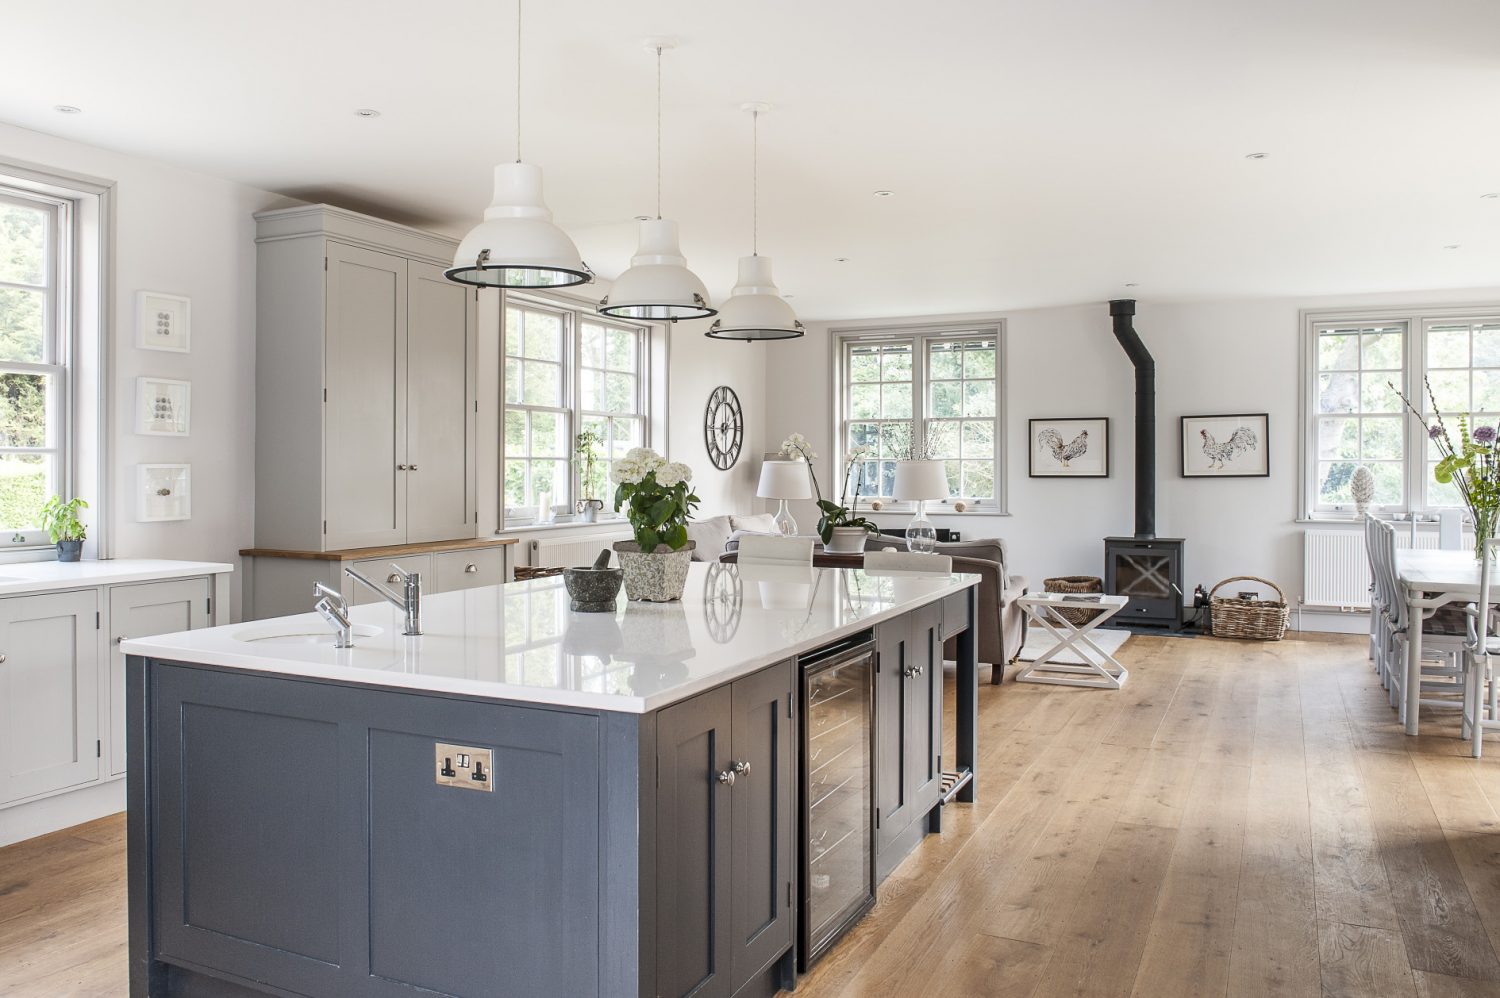 The large, open plan kitchen is now one of the most important rooms in the house and where the family spends most of their time